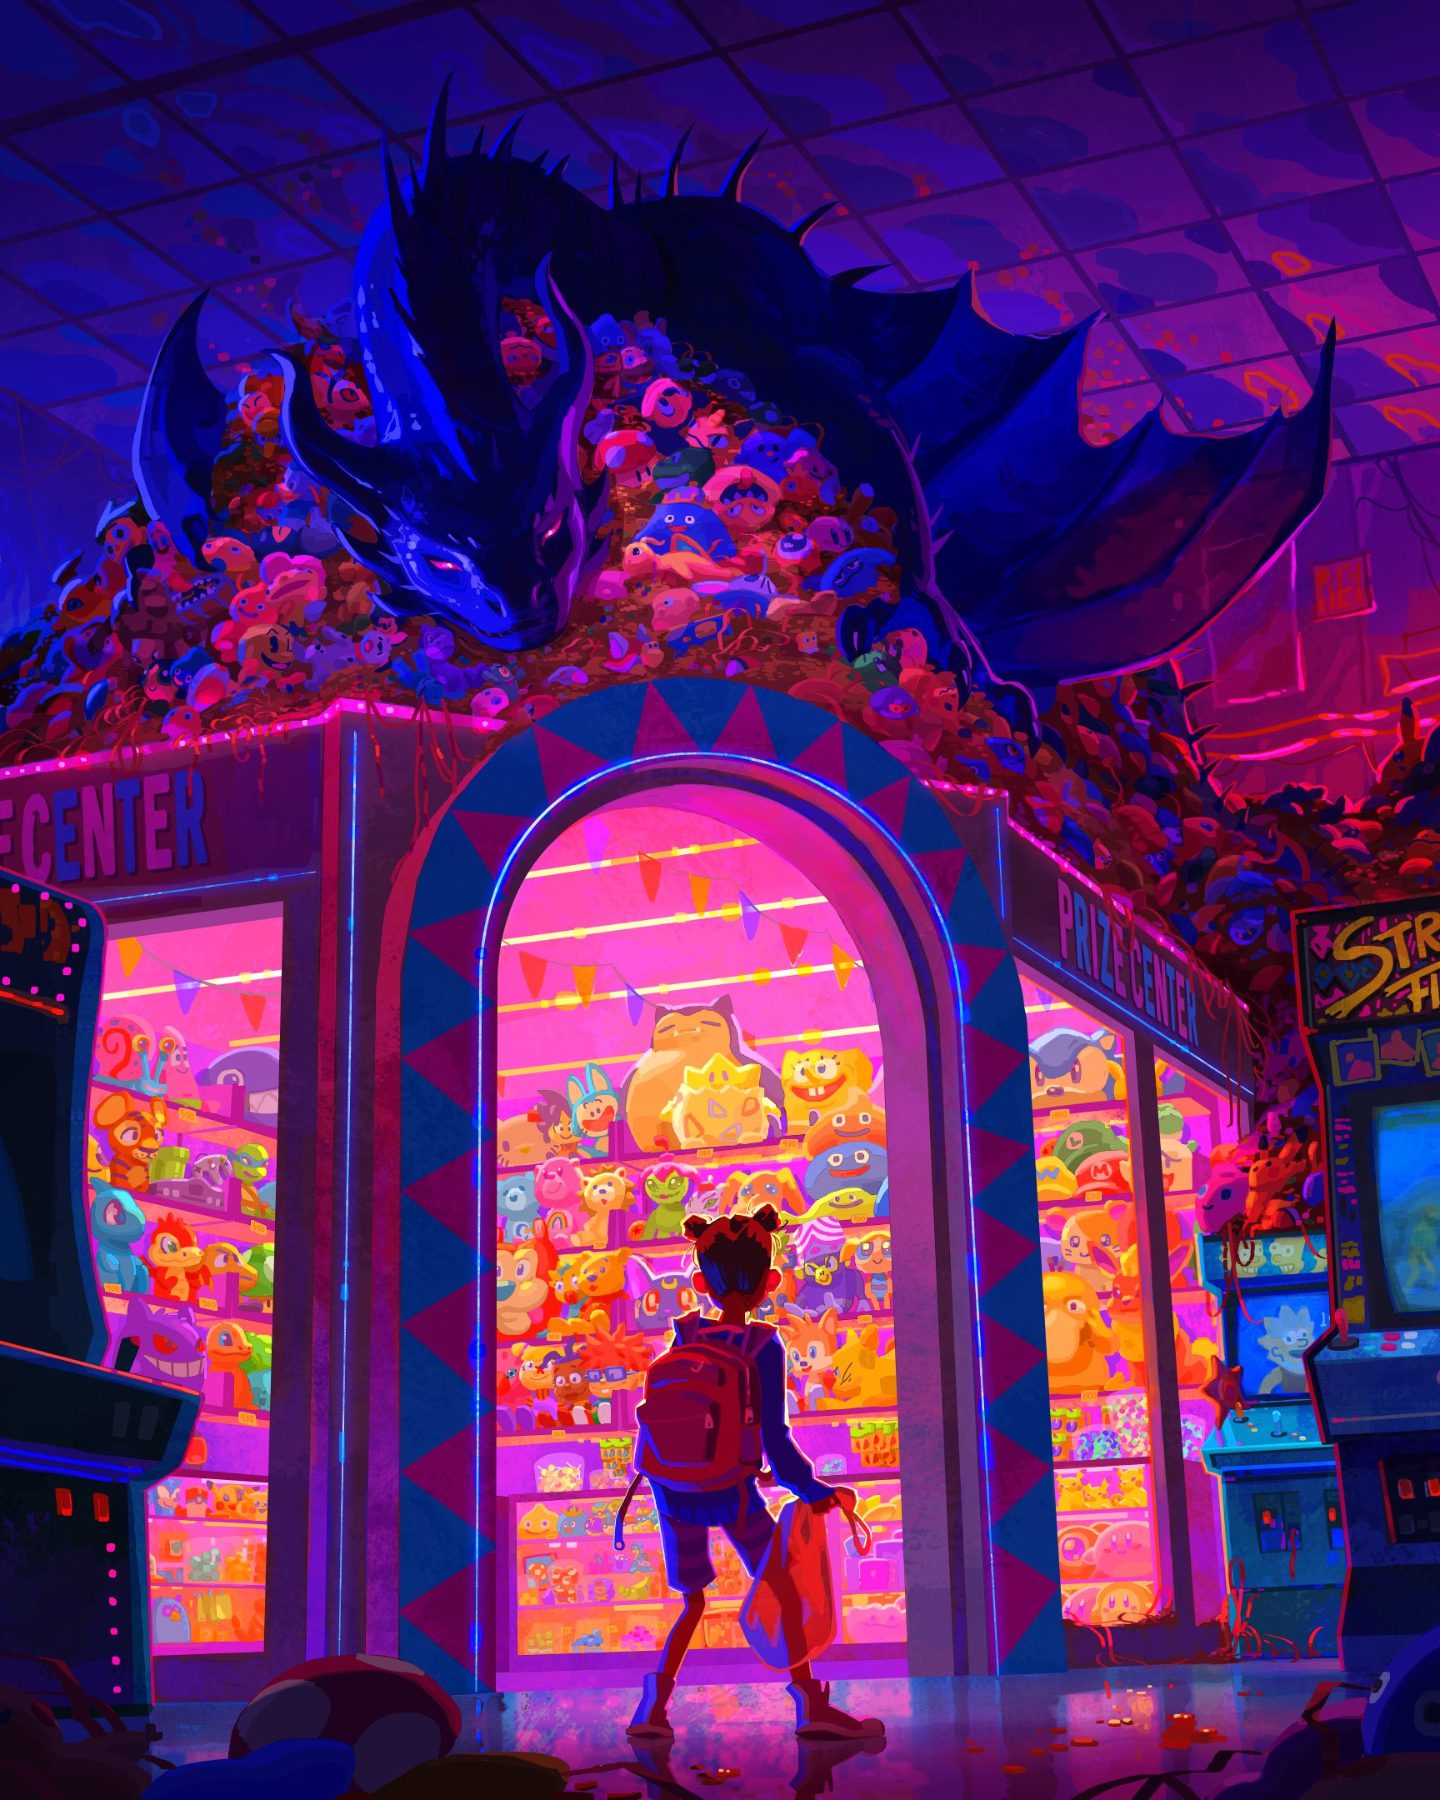 A girl creeps up on a dragon with a hoard of arcade toys